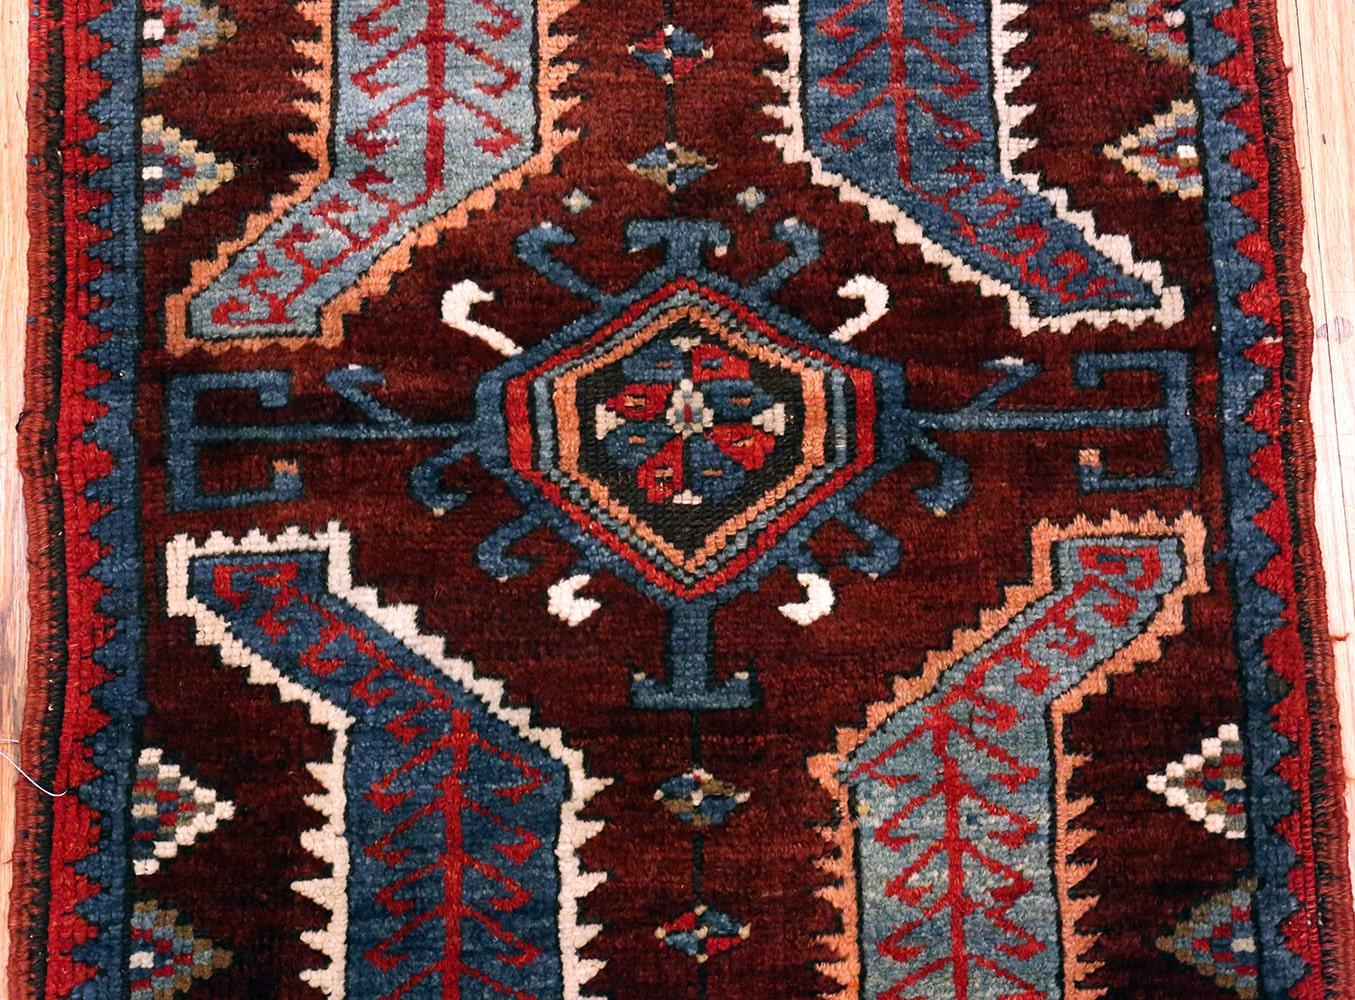 19th Century Small Antique Turkish Yastic Rug. Size: 2 ft 1 in x 3 ft 3 in (0.63 m x 0.99 m)